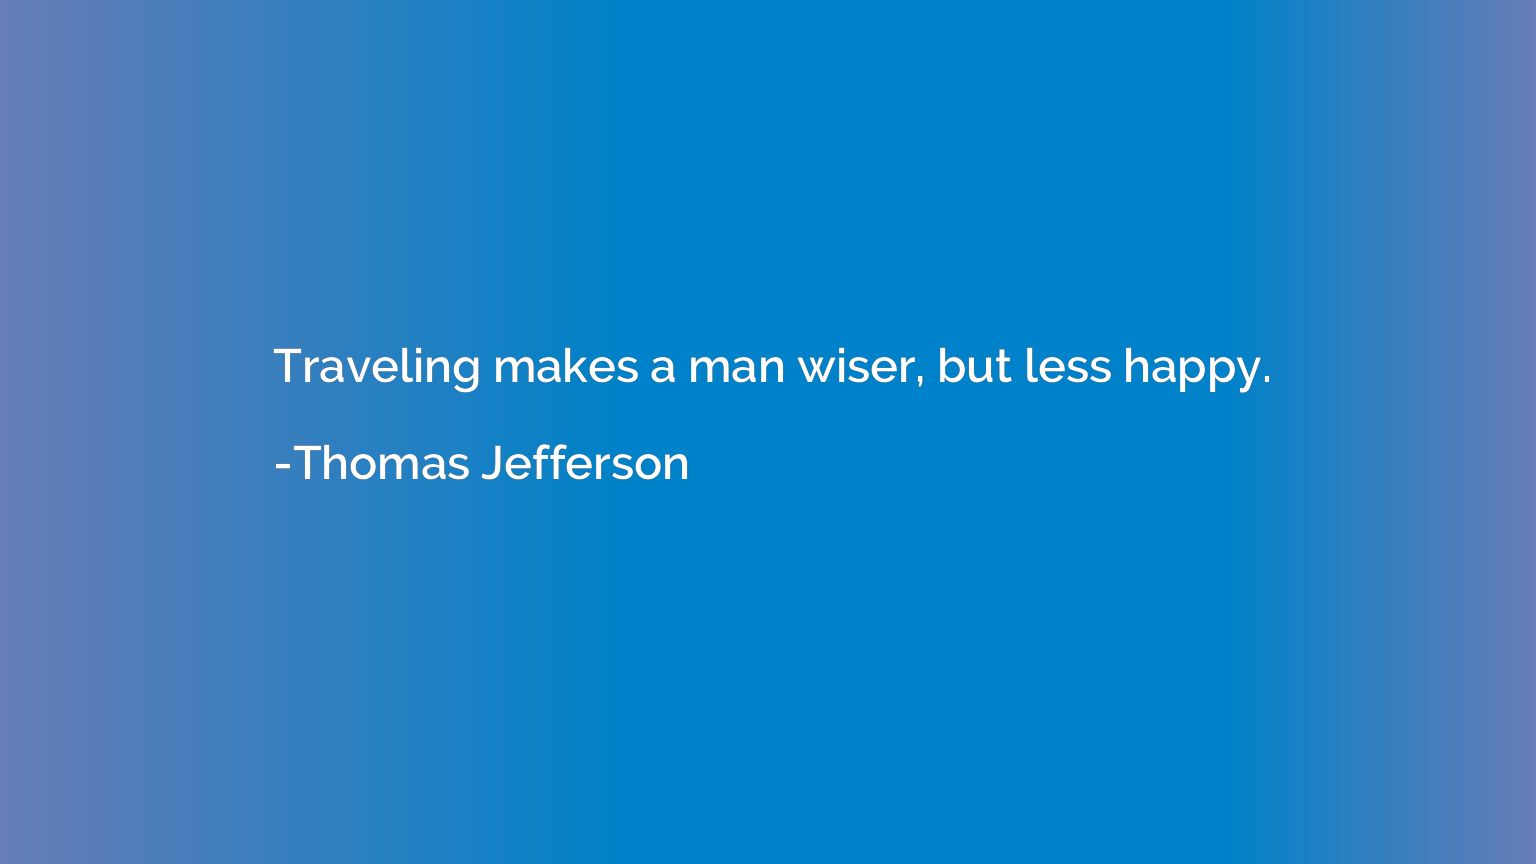 Traveling makes a man wiser, but less happy.